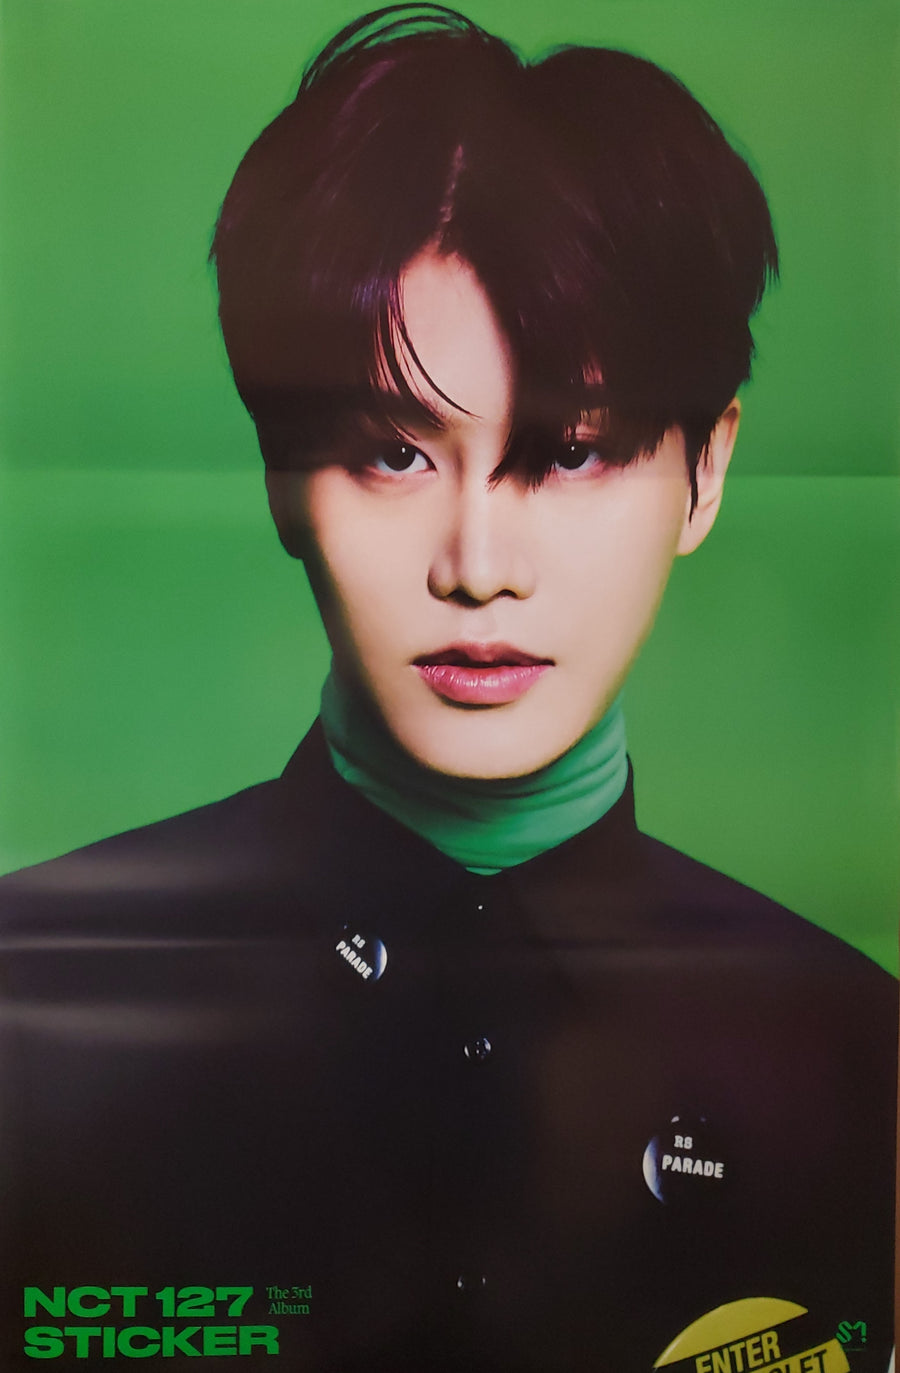 NCT 127 3rd Album Sticker (Jewel Case) Official Poster - Photo Concept Taeil